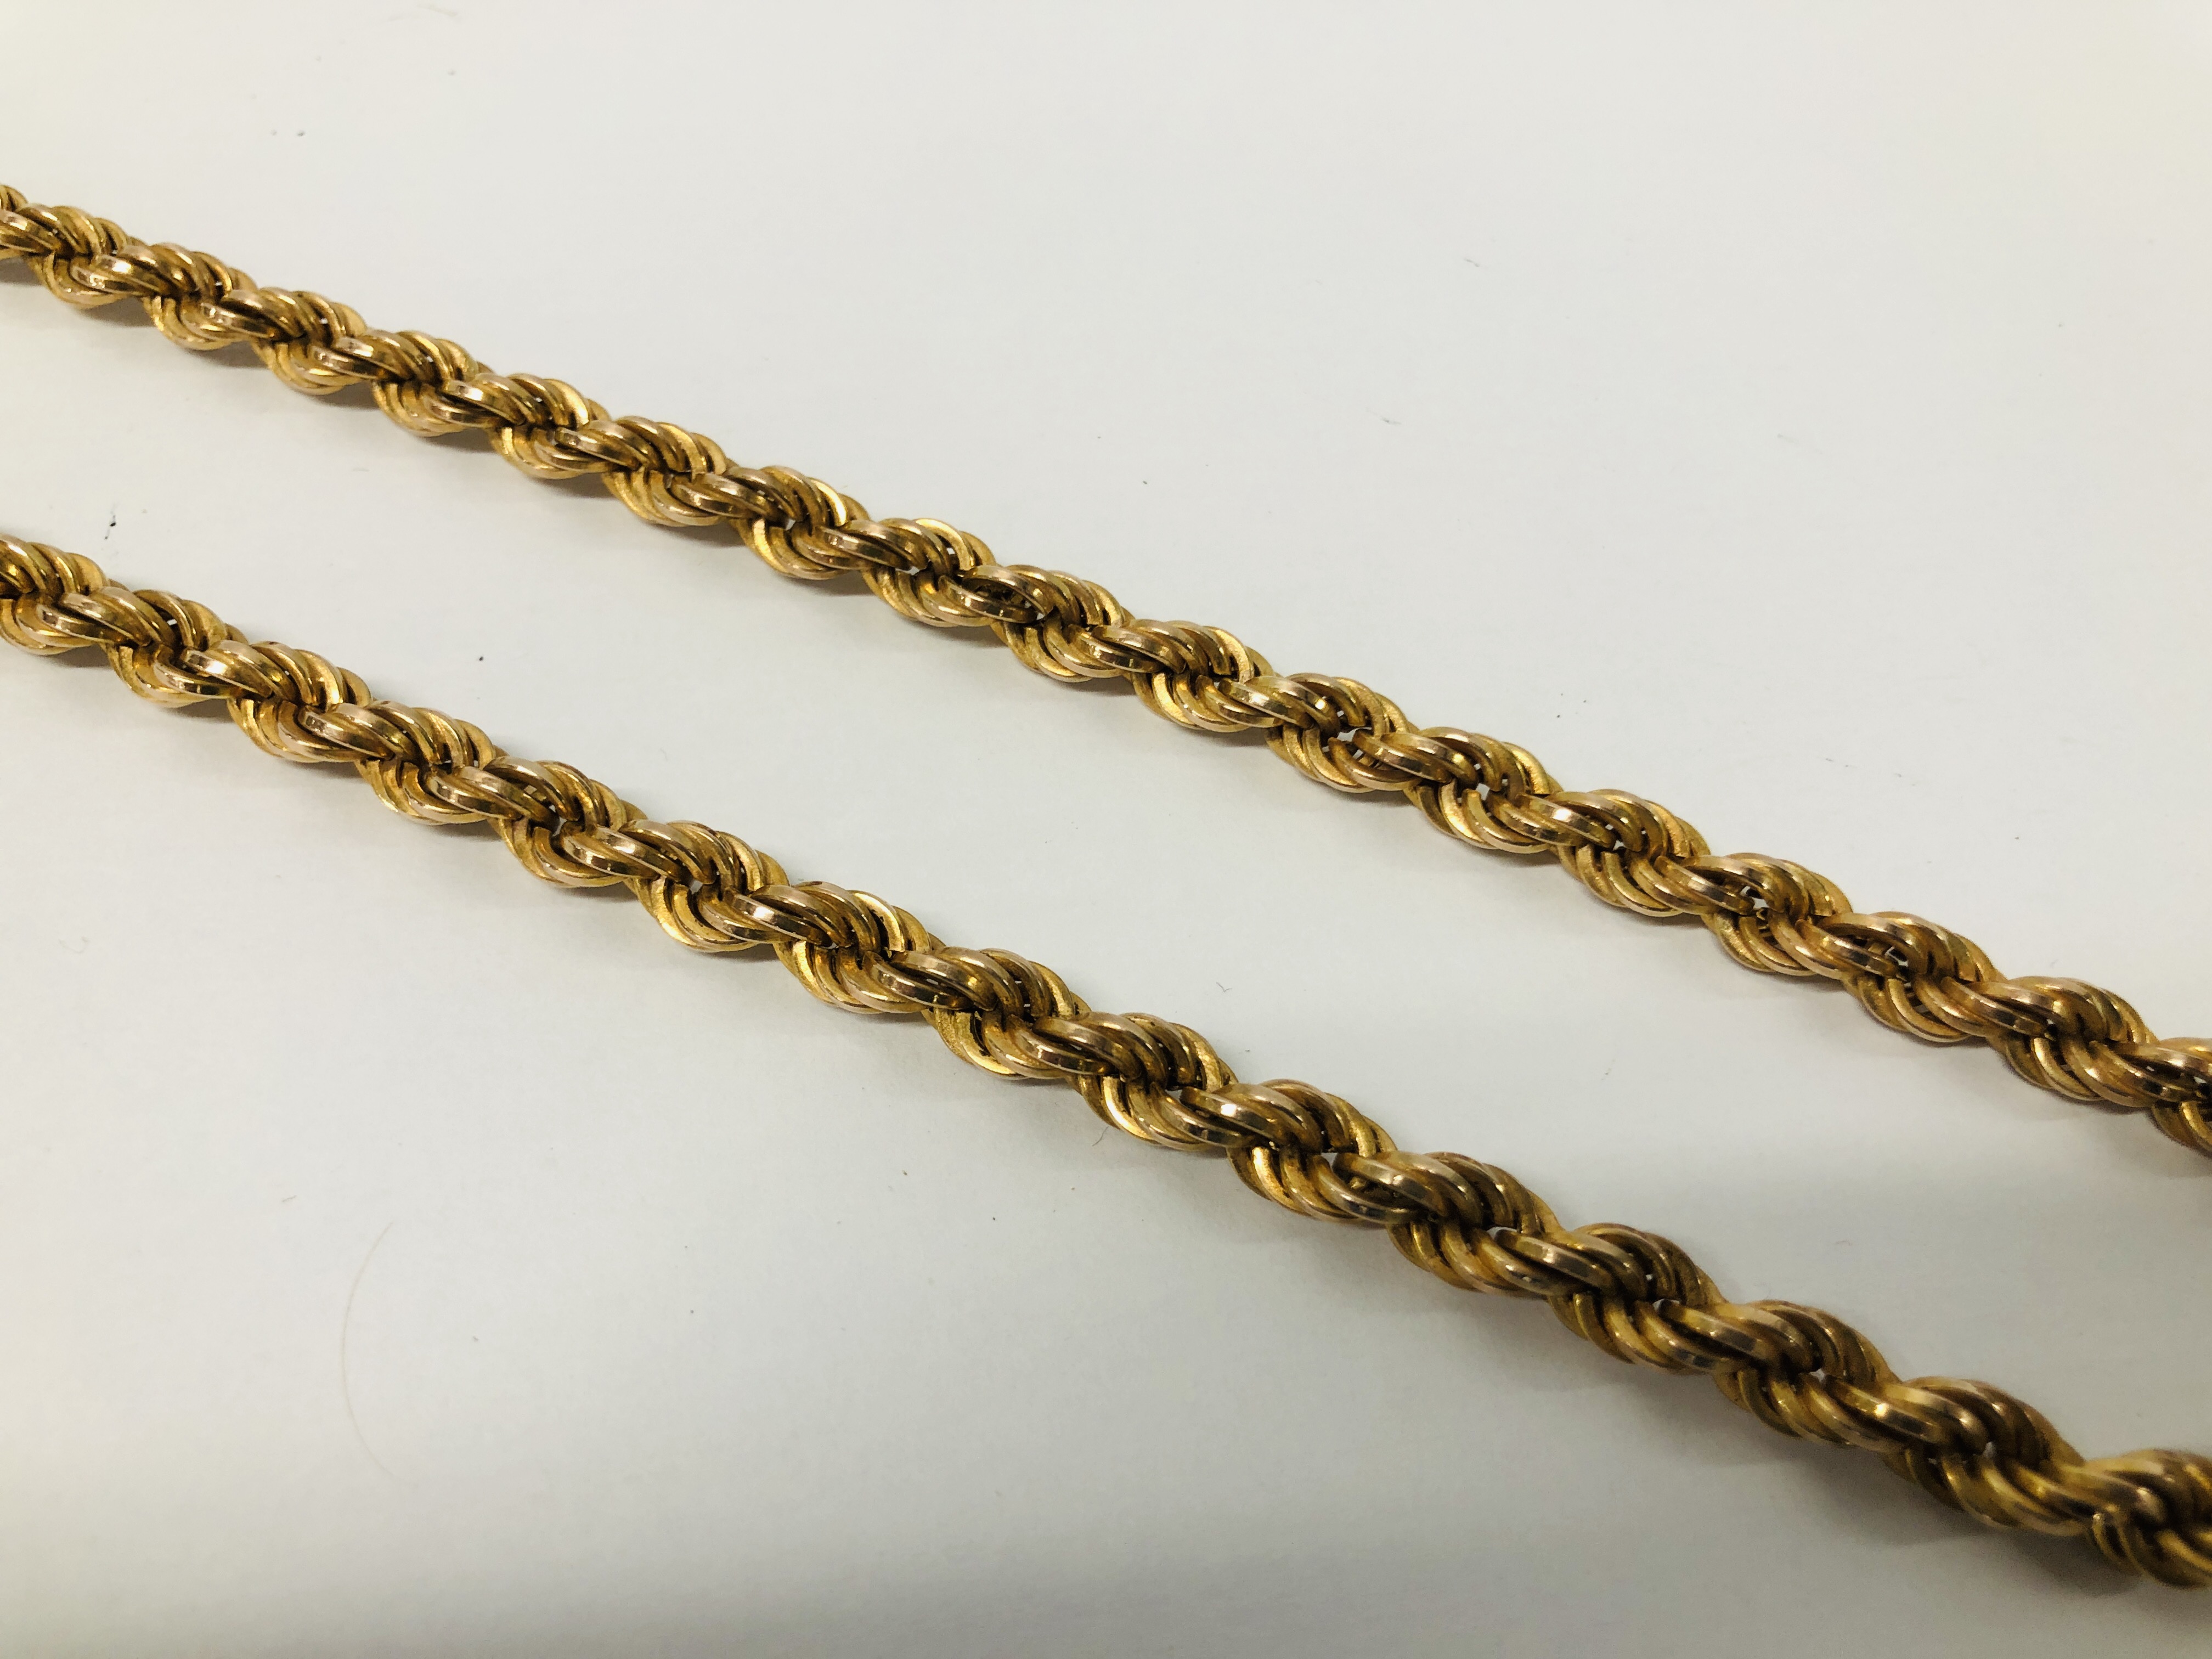 A 9CT GOLD ROPE NECKLACE - LENGTH 60CM - Image 4 of 7